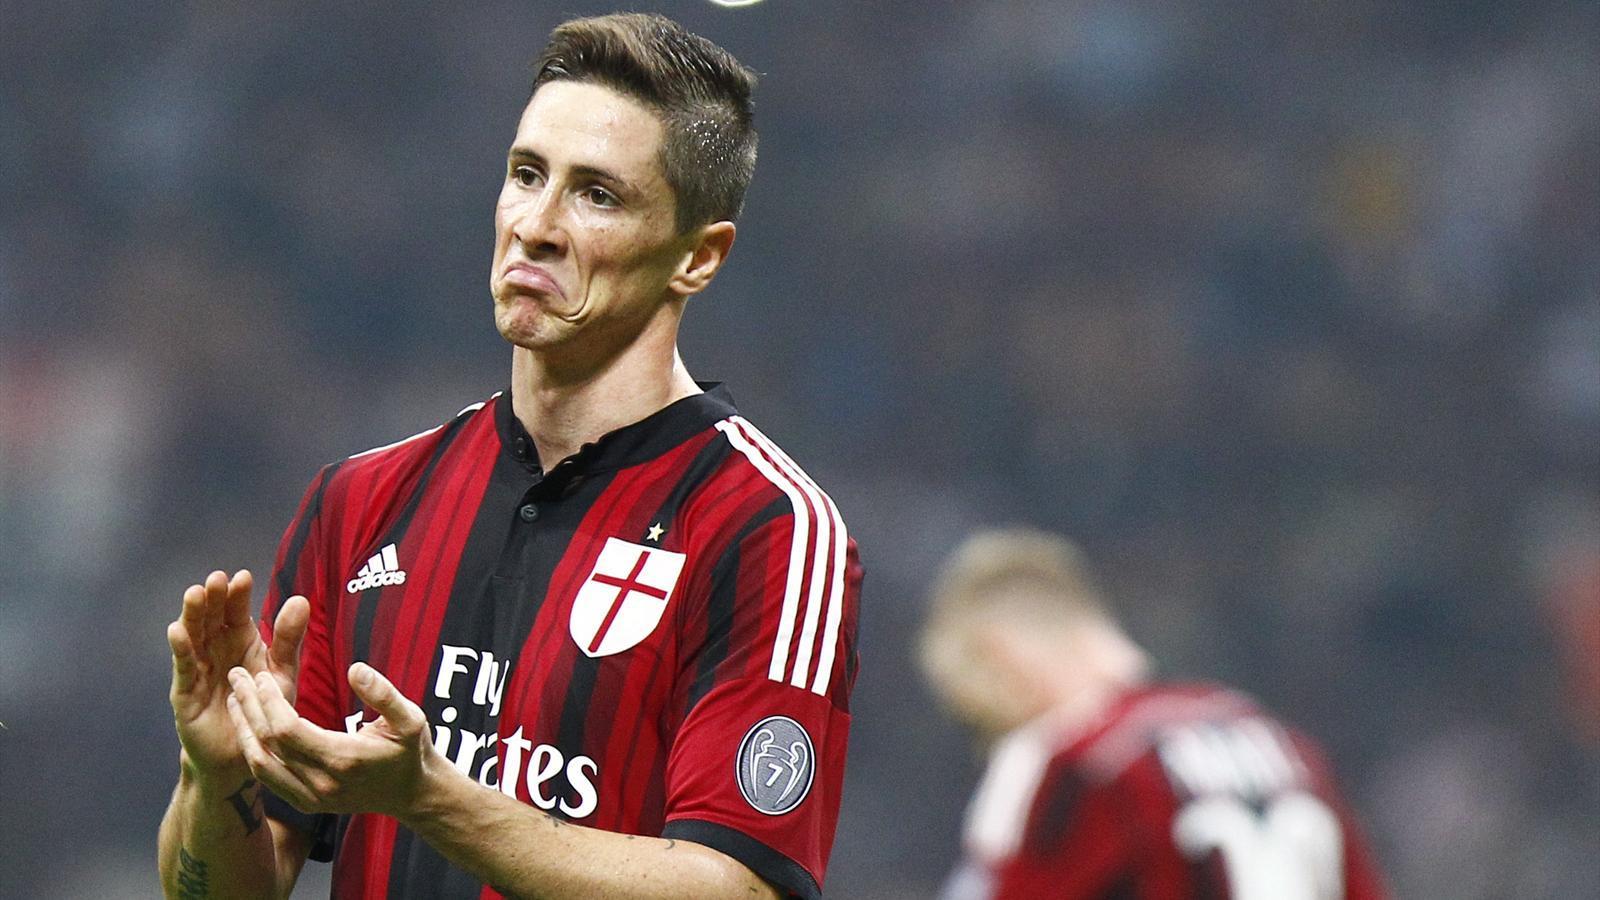 Fernando Torres to join AC Milan permanently